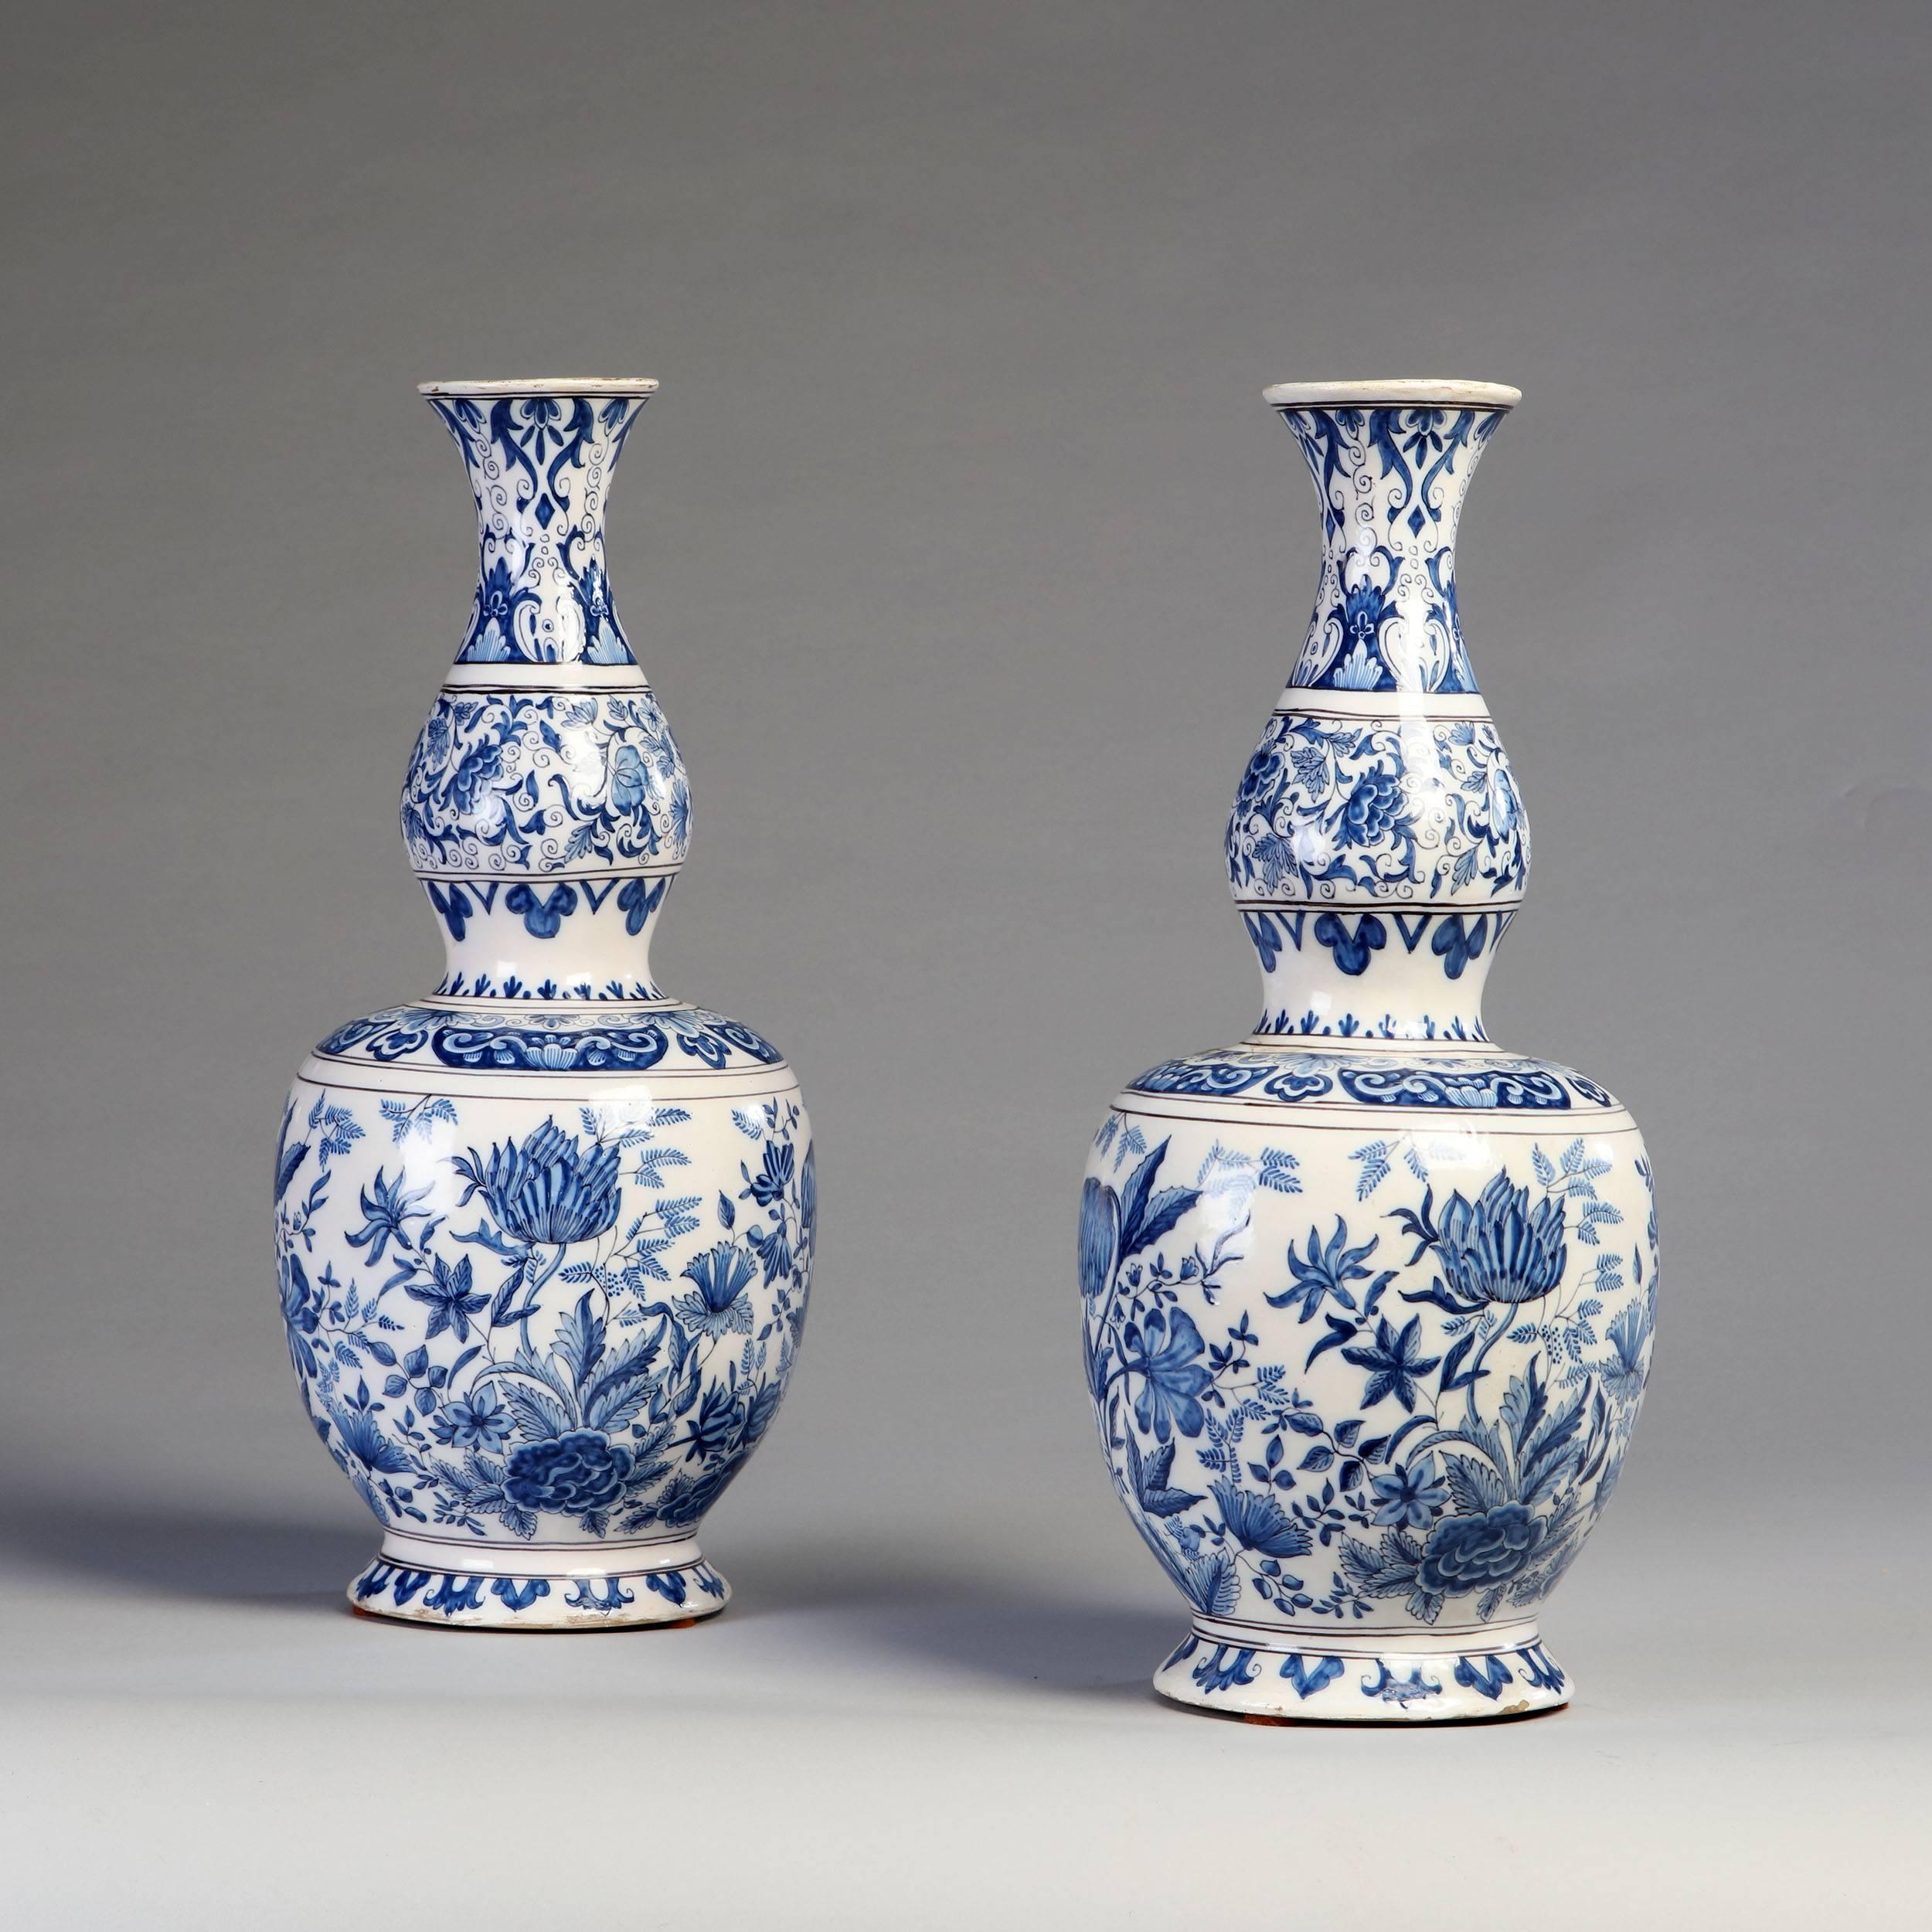 A fine pair of 18th century delft vases, now converted as lamps.